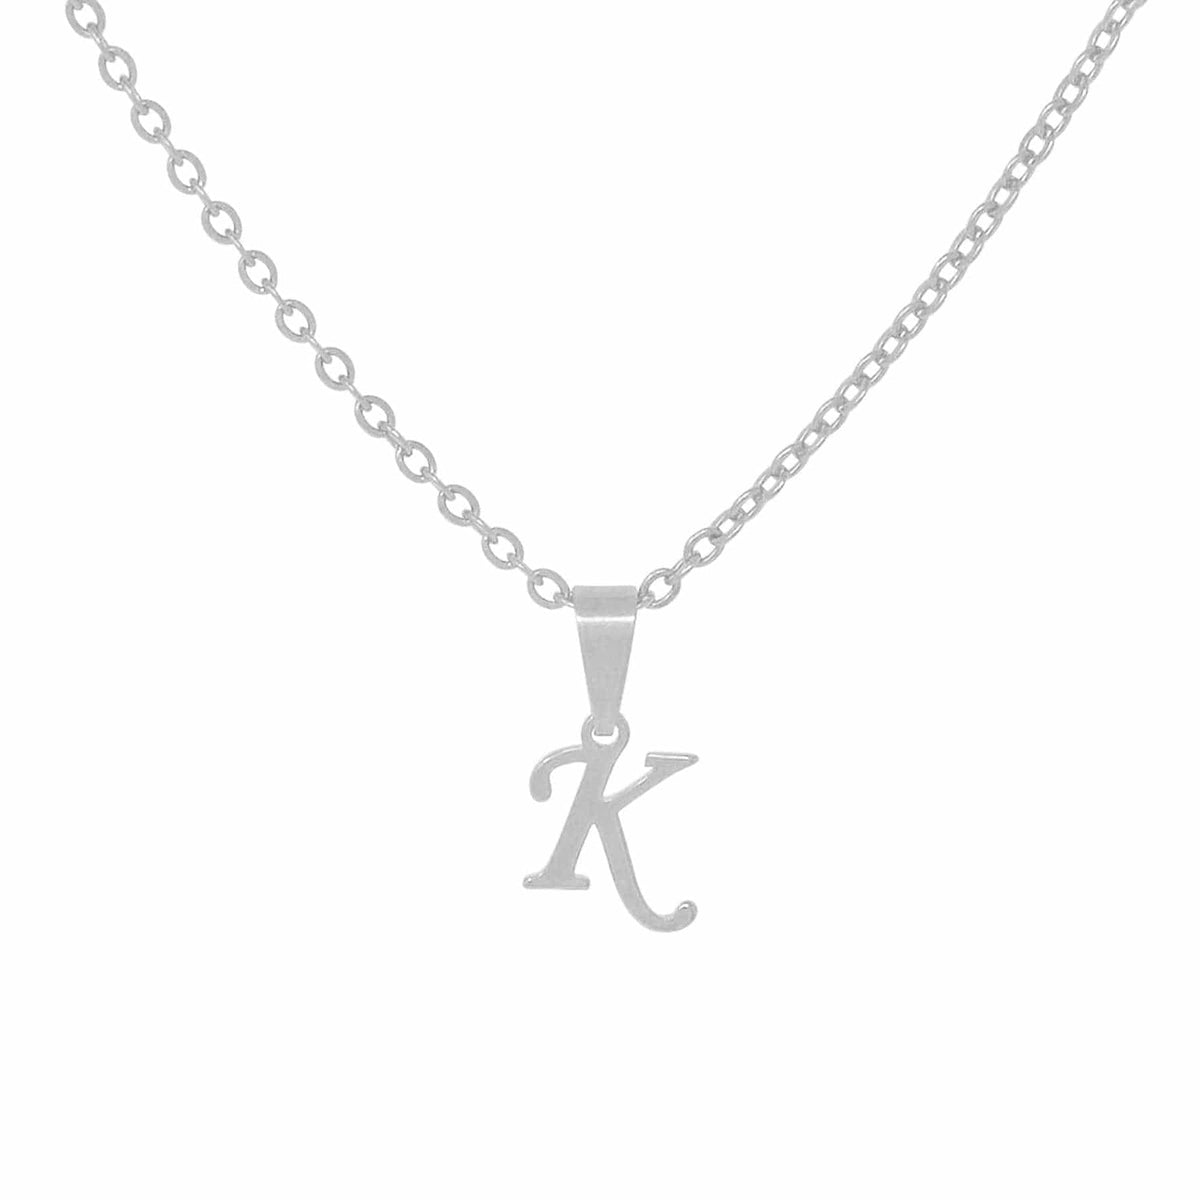 BohoMoon Stainless Steel Petite Initial Choker / Necklace Silver / A / Choker